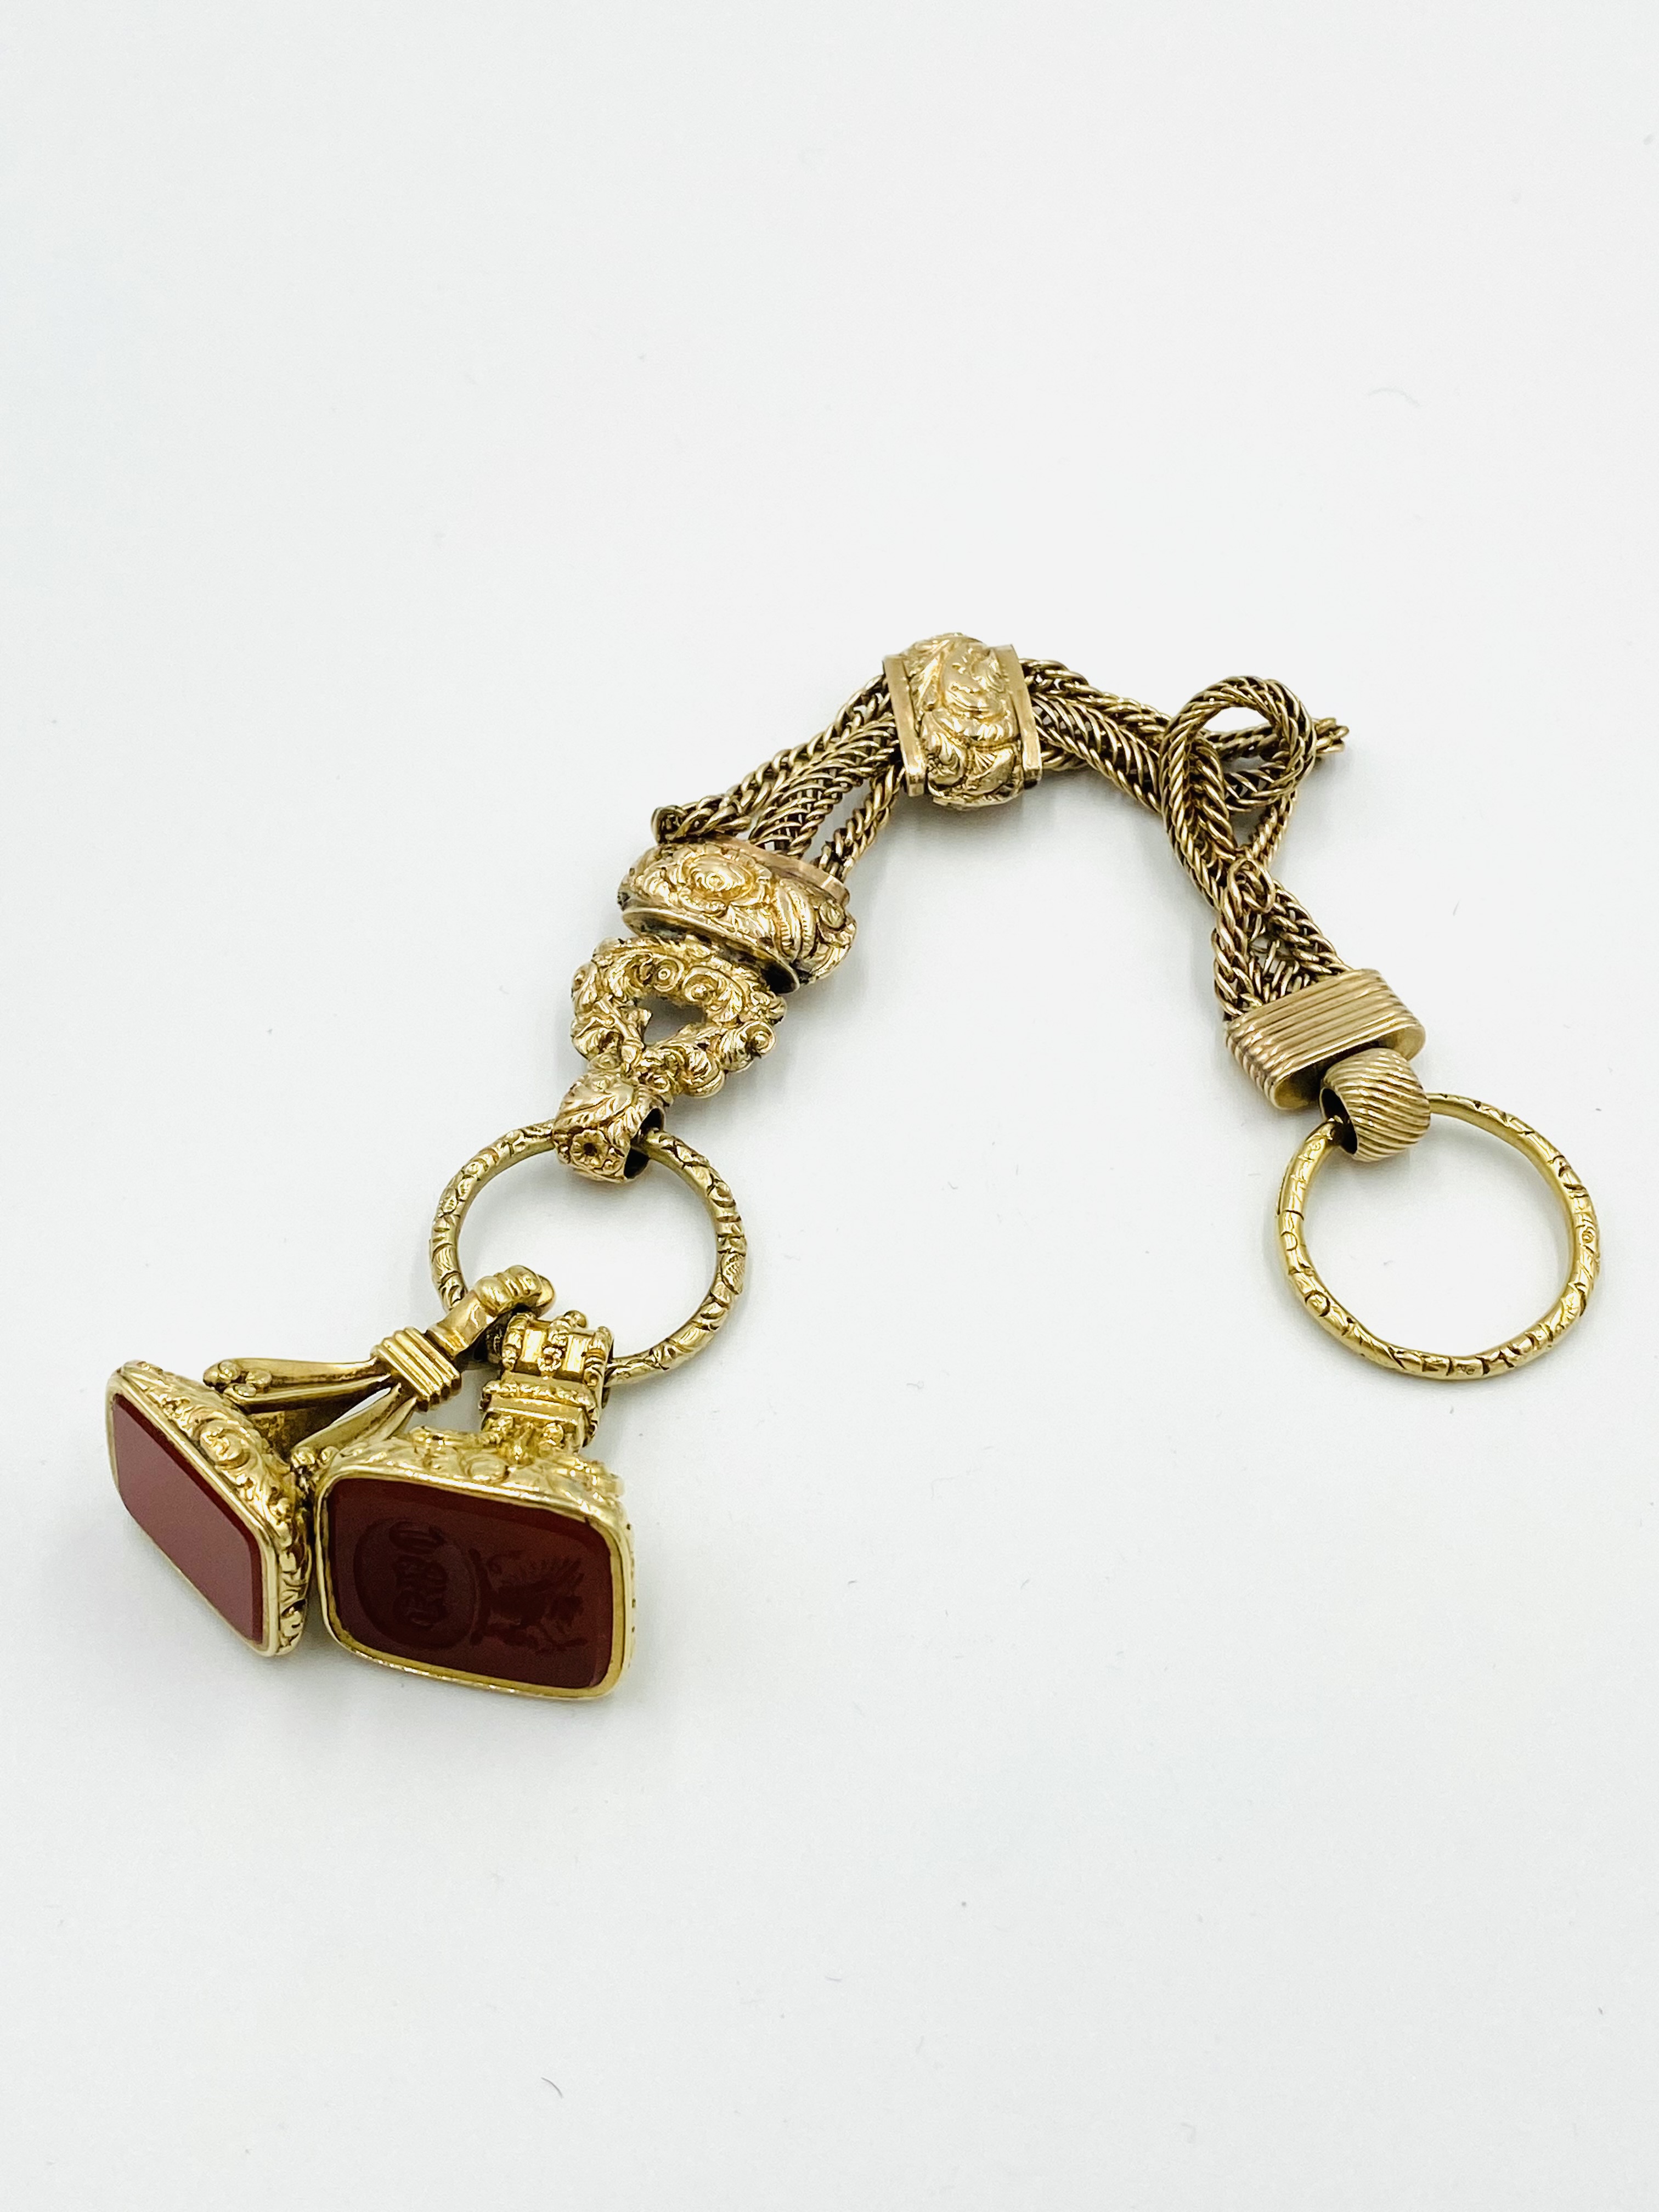 Gold fob chain with two seals